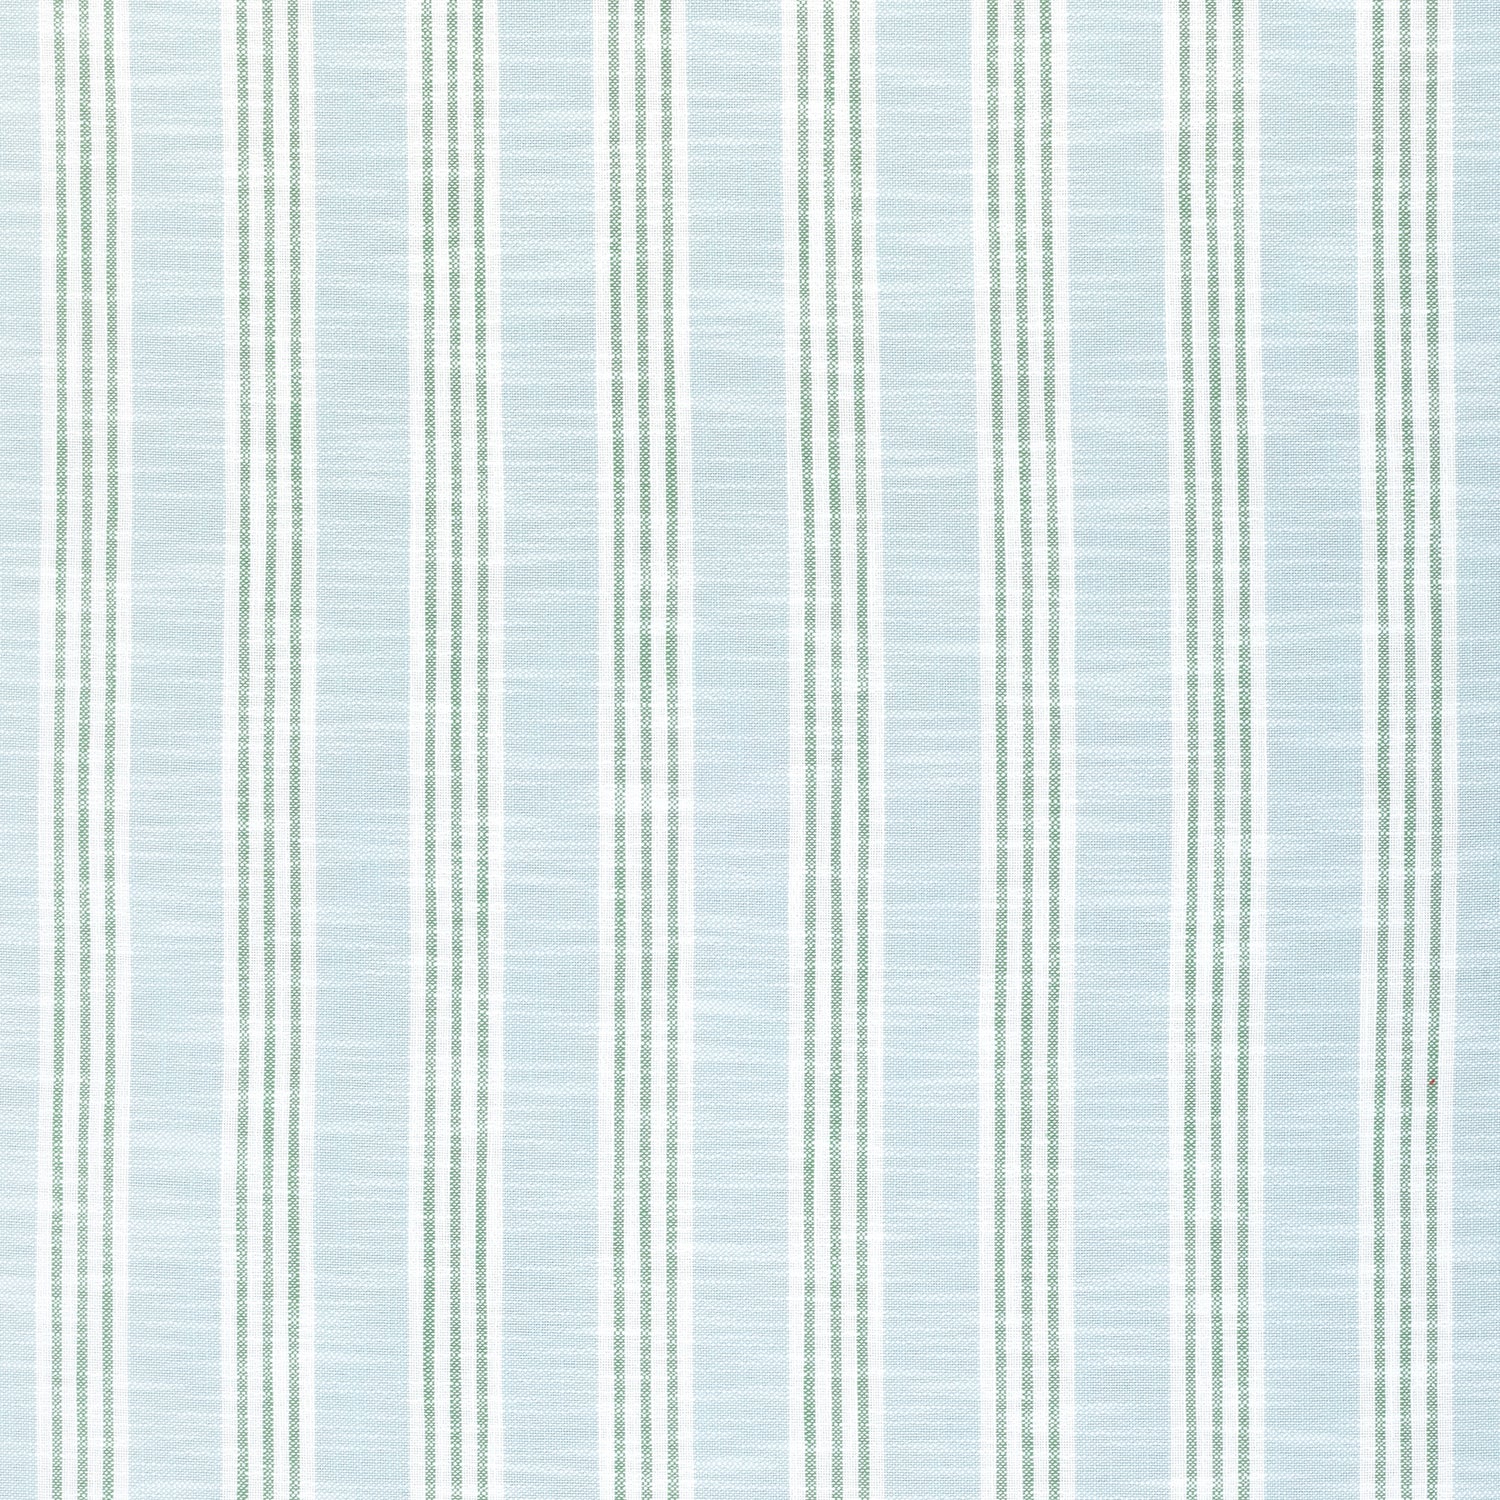 Southport Stripe fabric in seafoam and kelly green color - pattern number W73485 - by Thibaut in the Landmark collection